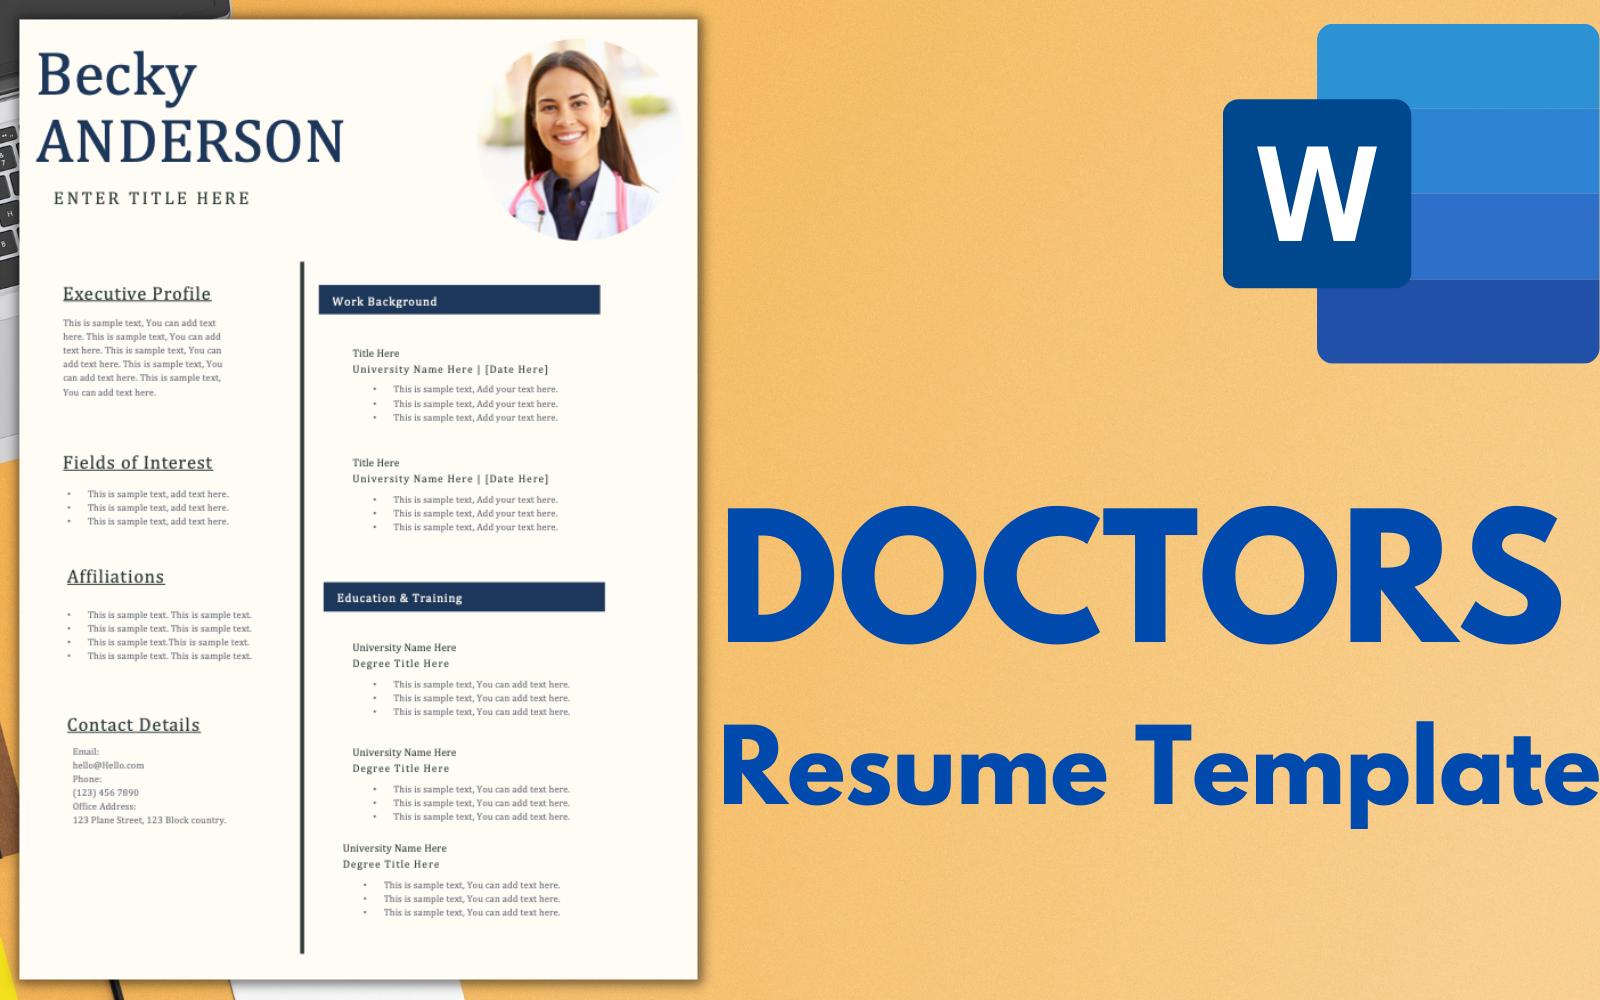 ONE-PAGE Resume / CV Template for DOCTORS.